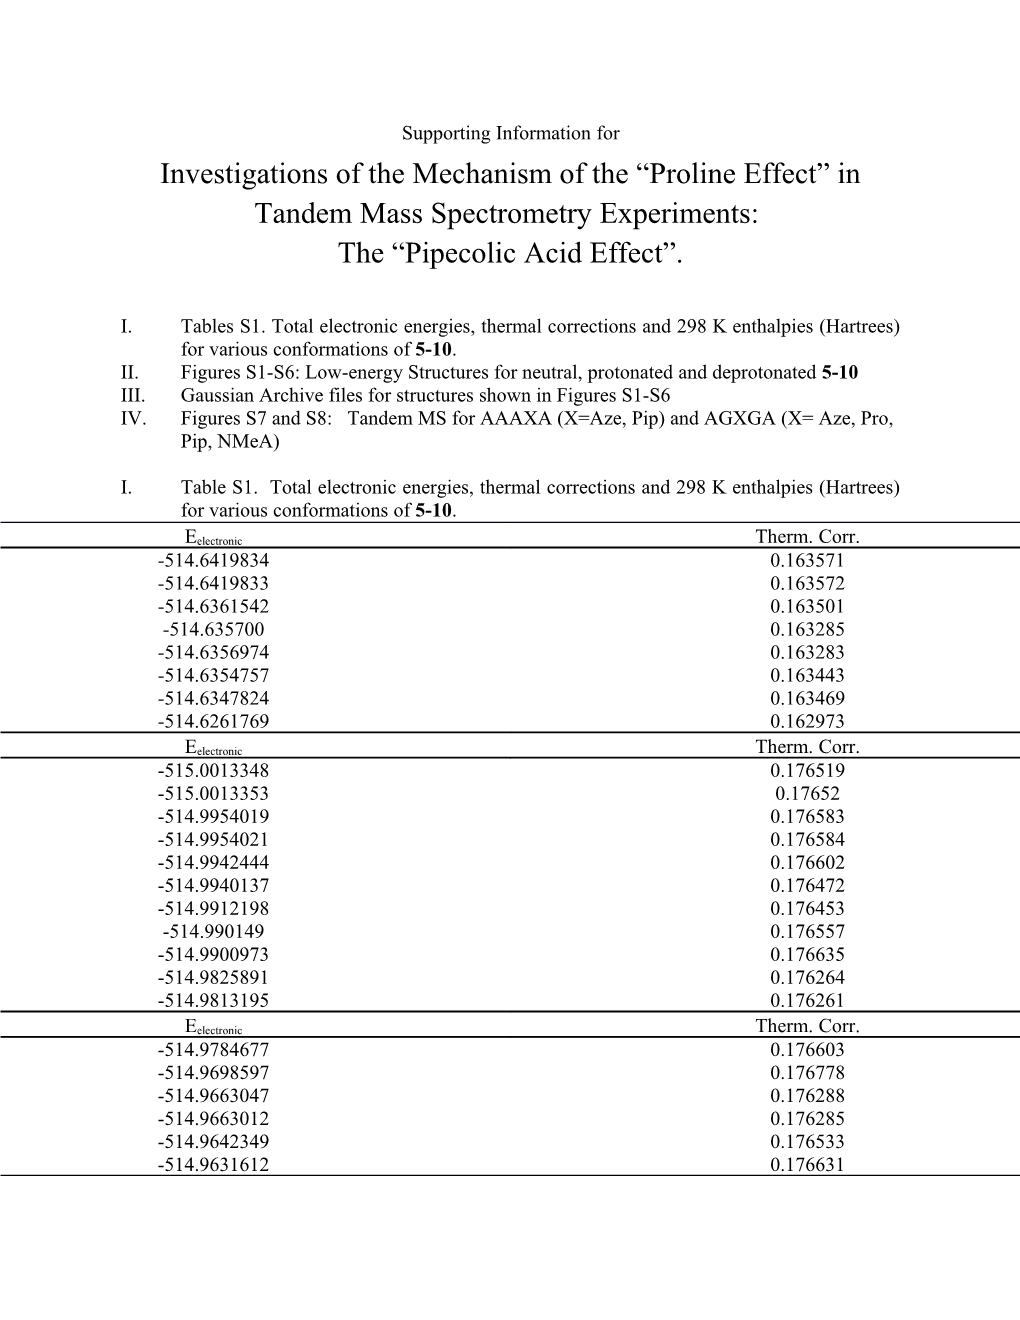 Investigations of the Mechanism of the Proline Effect in Tandem Mass Spectrometry Experiments